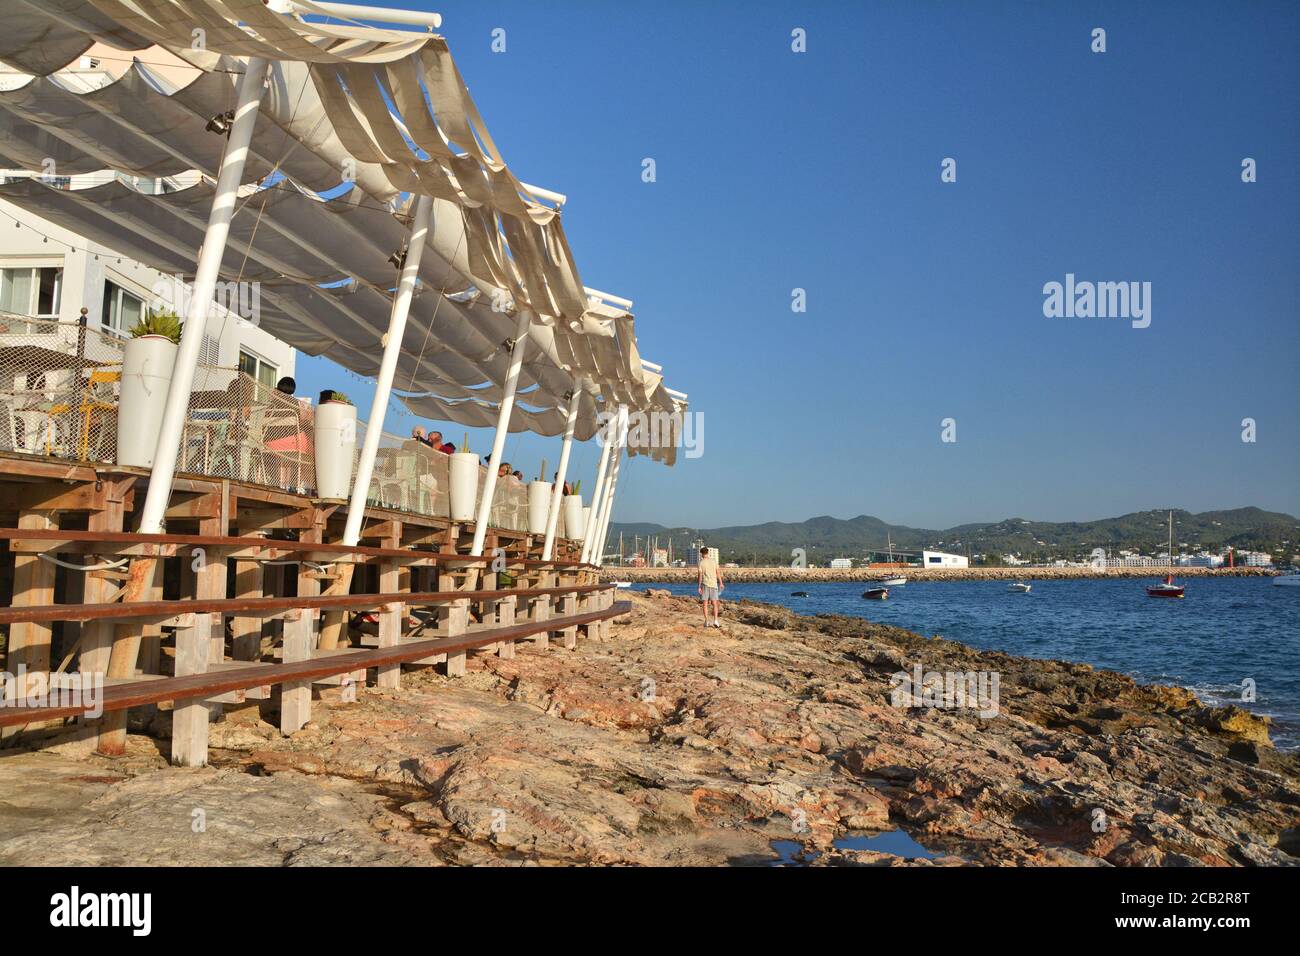 IBIZA, SPAIN - JULY 12, 2017: Cafe del Mar in San Antonio de Portmany on Ibiza island. It is a famous seaside bar with the best views of sunset with c Stock Photo